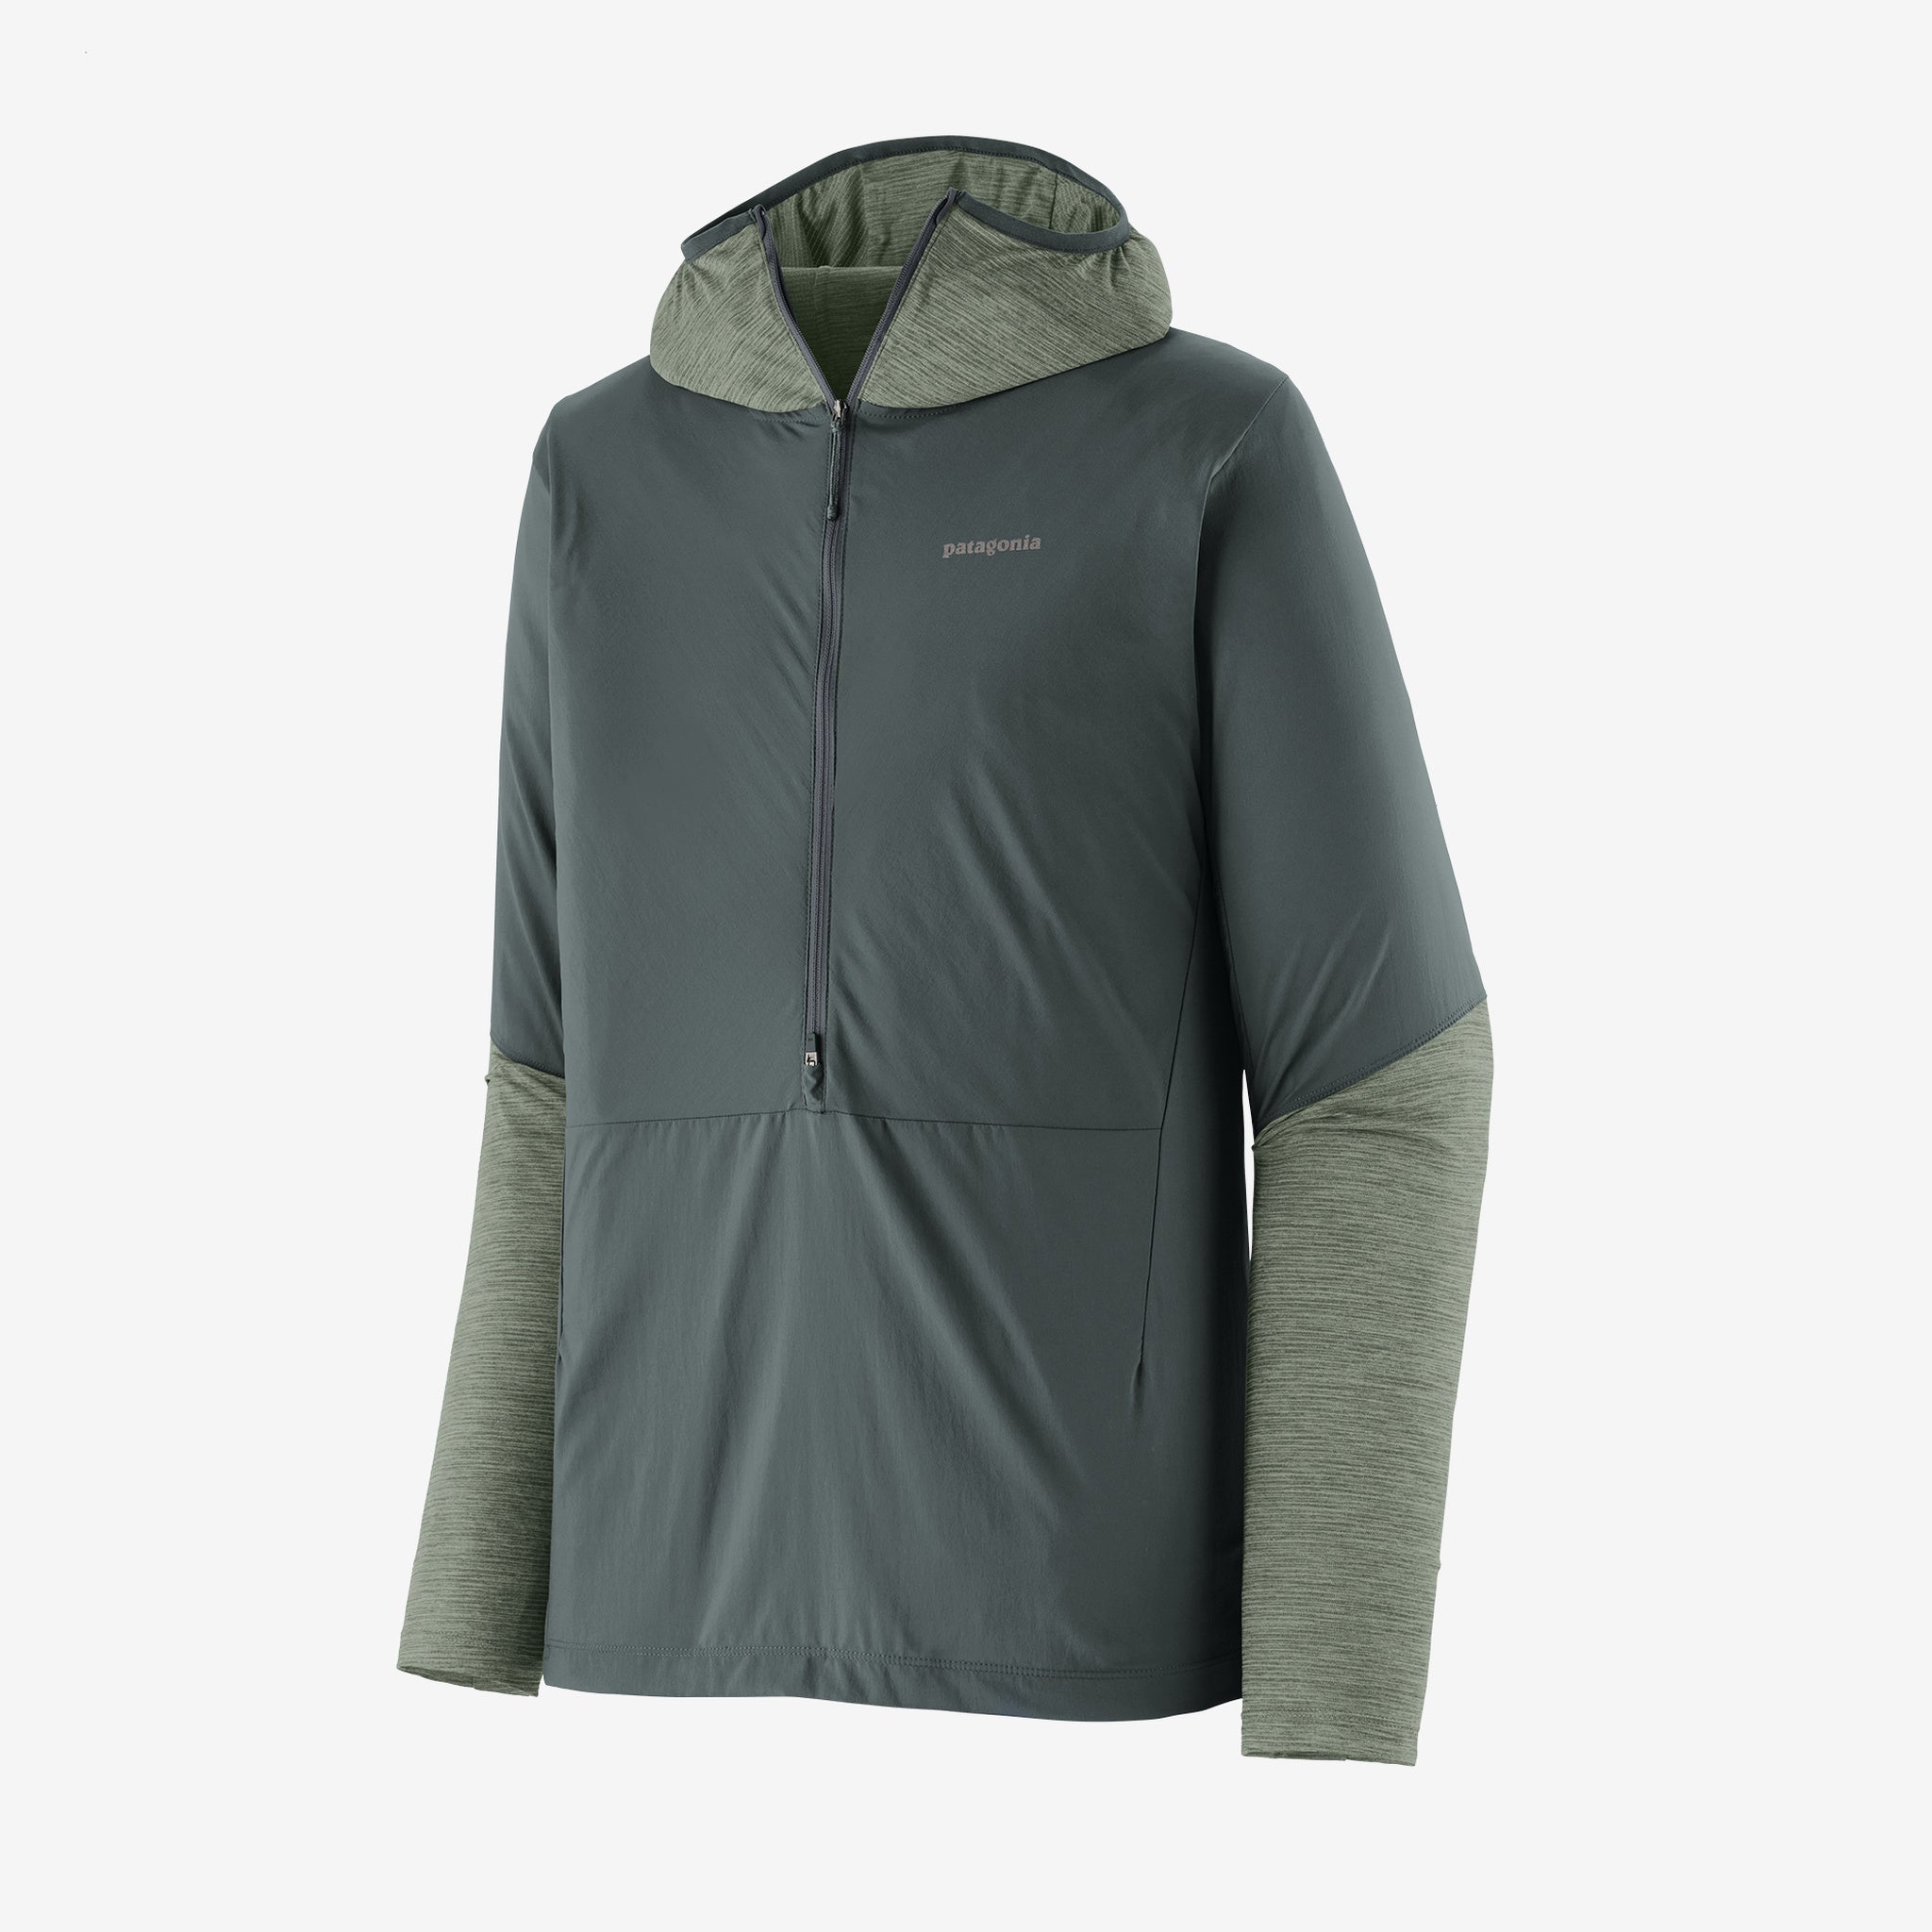 Men's Airshed Pro Pullover - Patagonia New Zealand